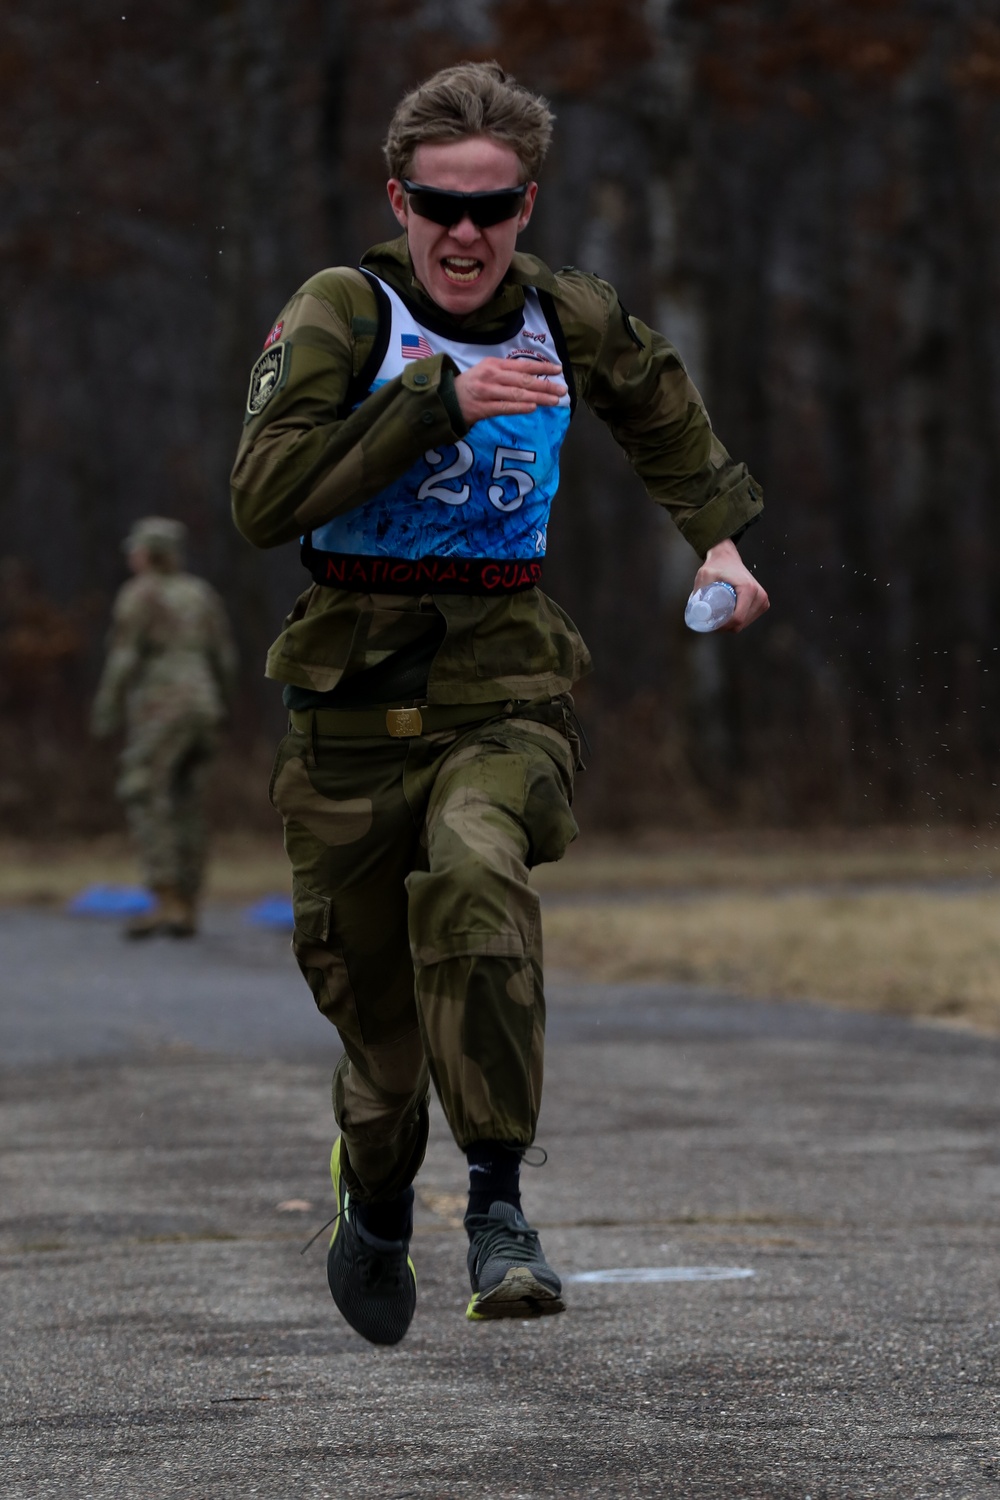 The Norwegian Home Defense Youth Complete a Biathlon Event During the 51st NOREX at Camp Ripley